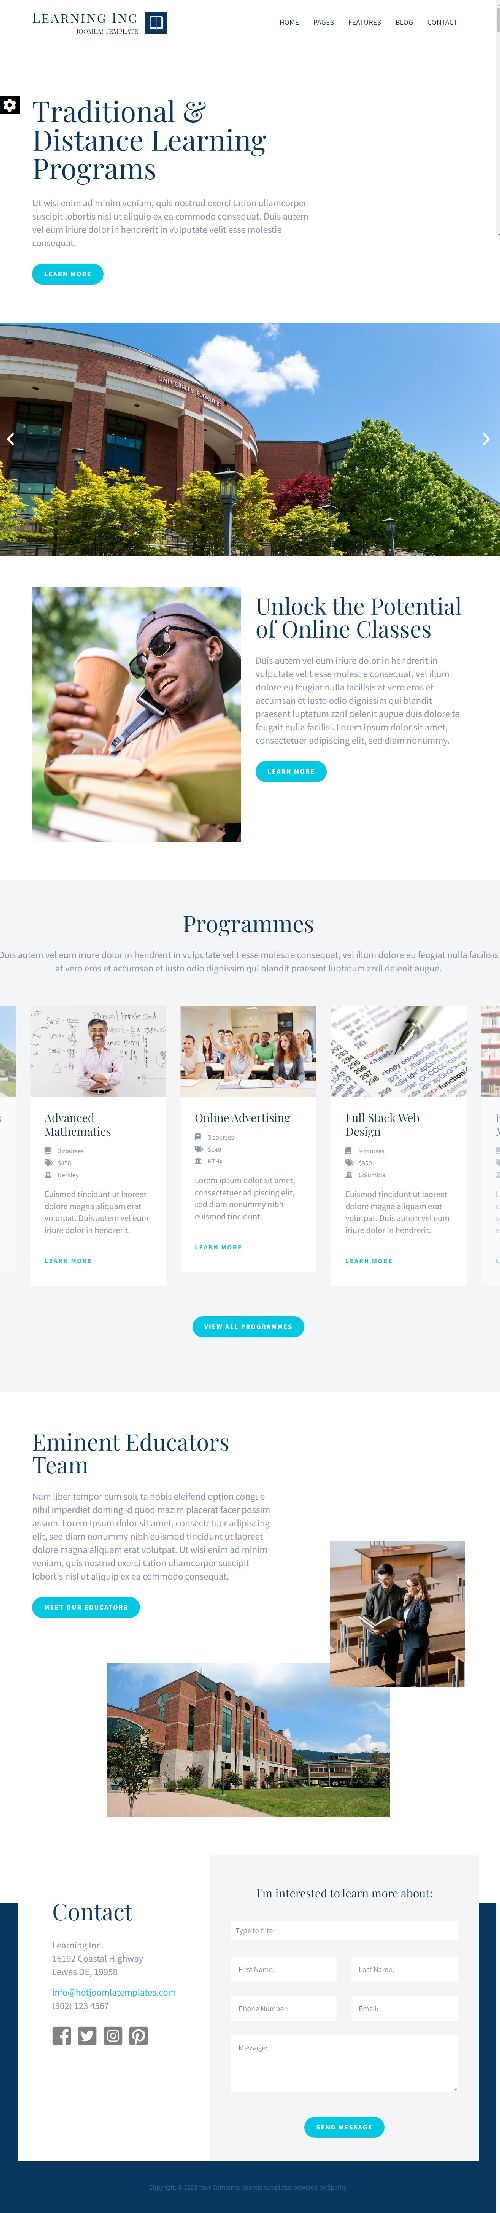 Learning - Joomla 4 Template Built for Educational Sites